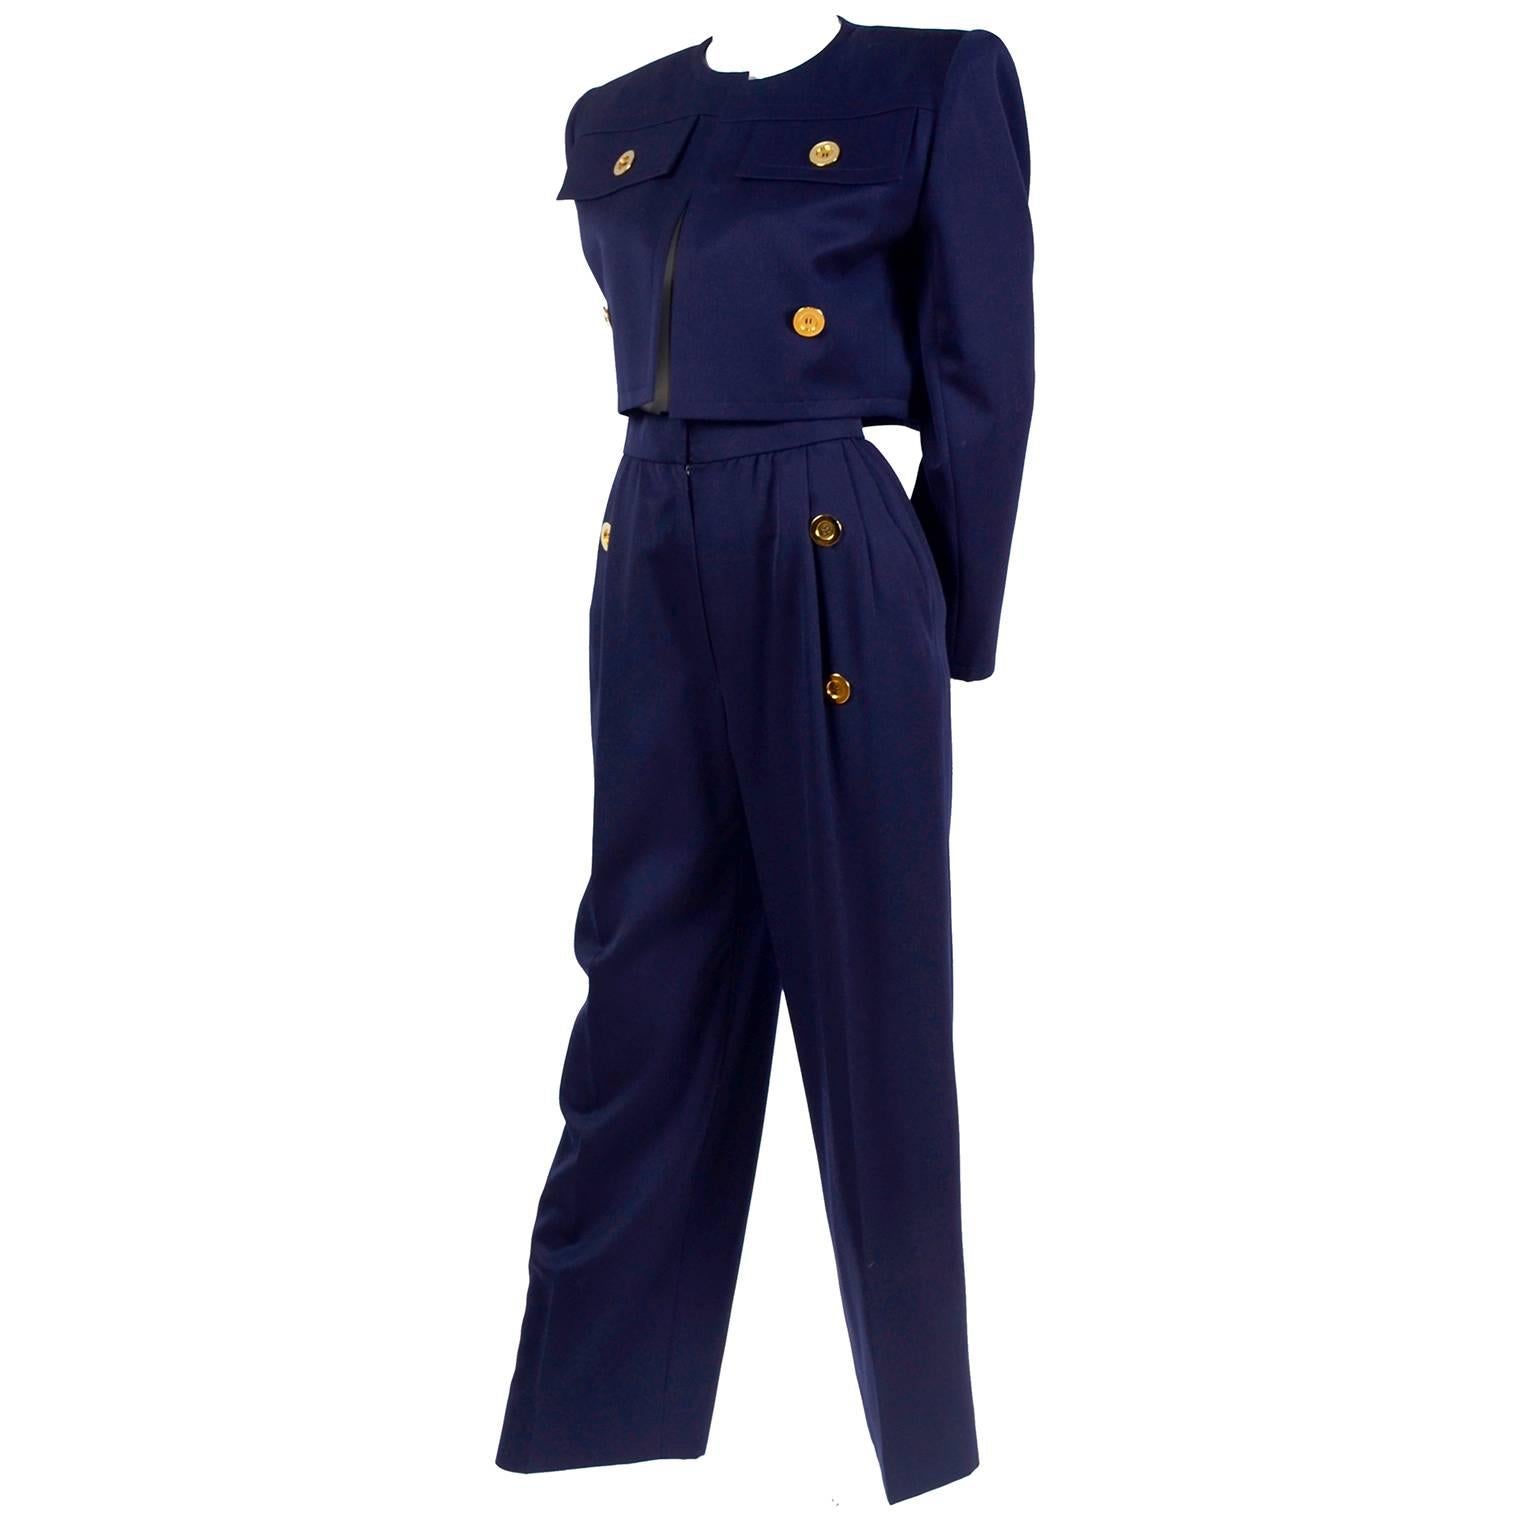 Women's Givenchy Vintage Navy Blue Cropped Jacket and High Waist Pantsuit, 1980s